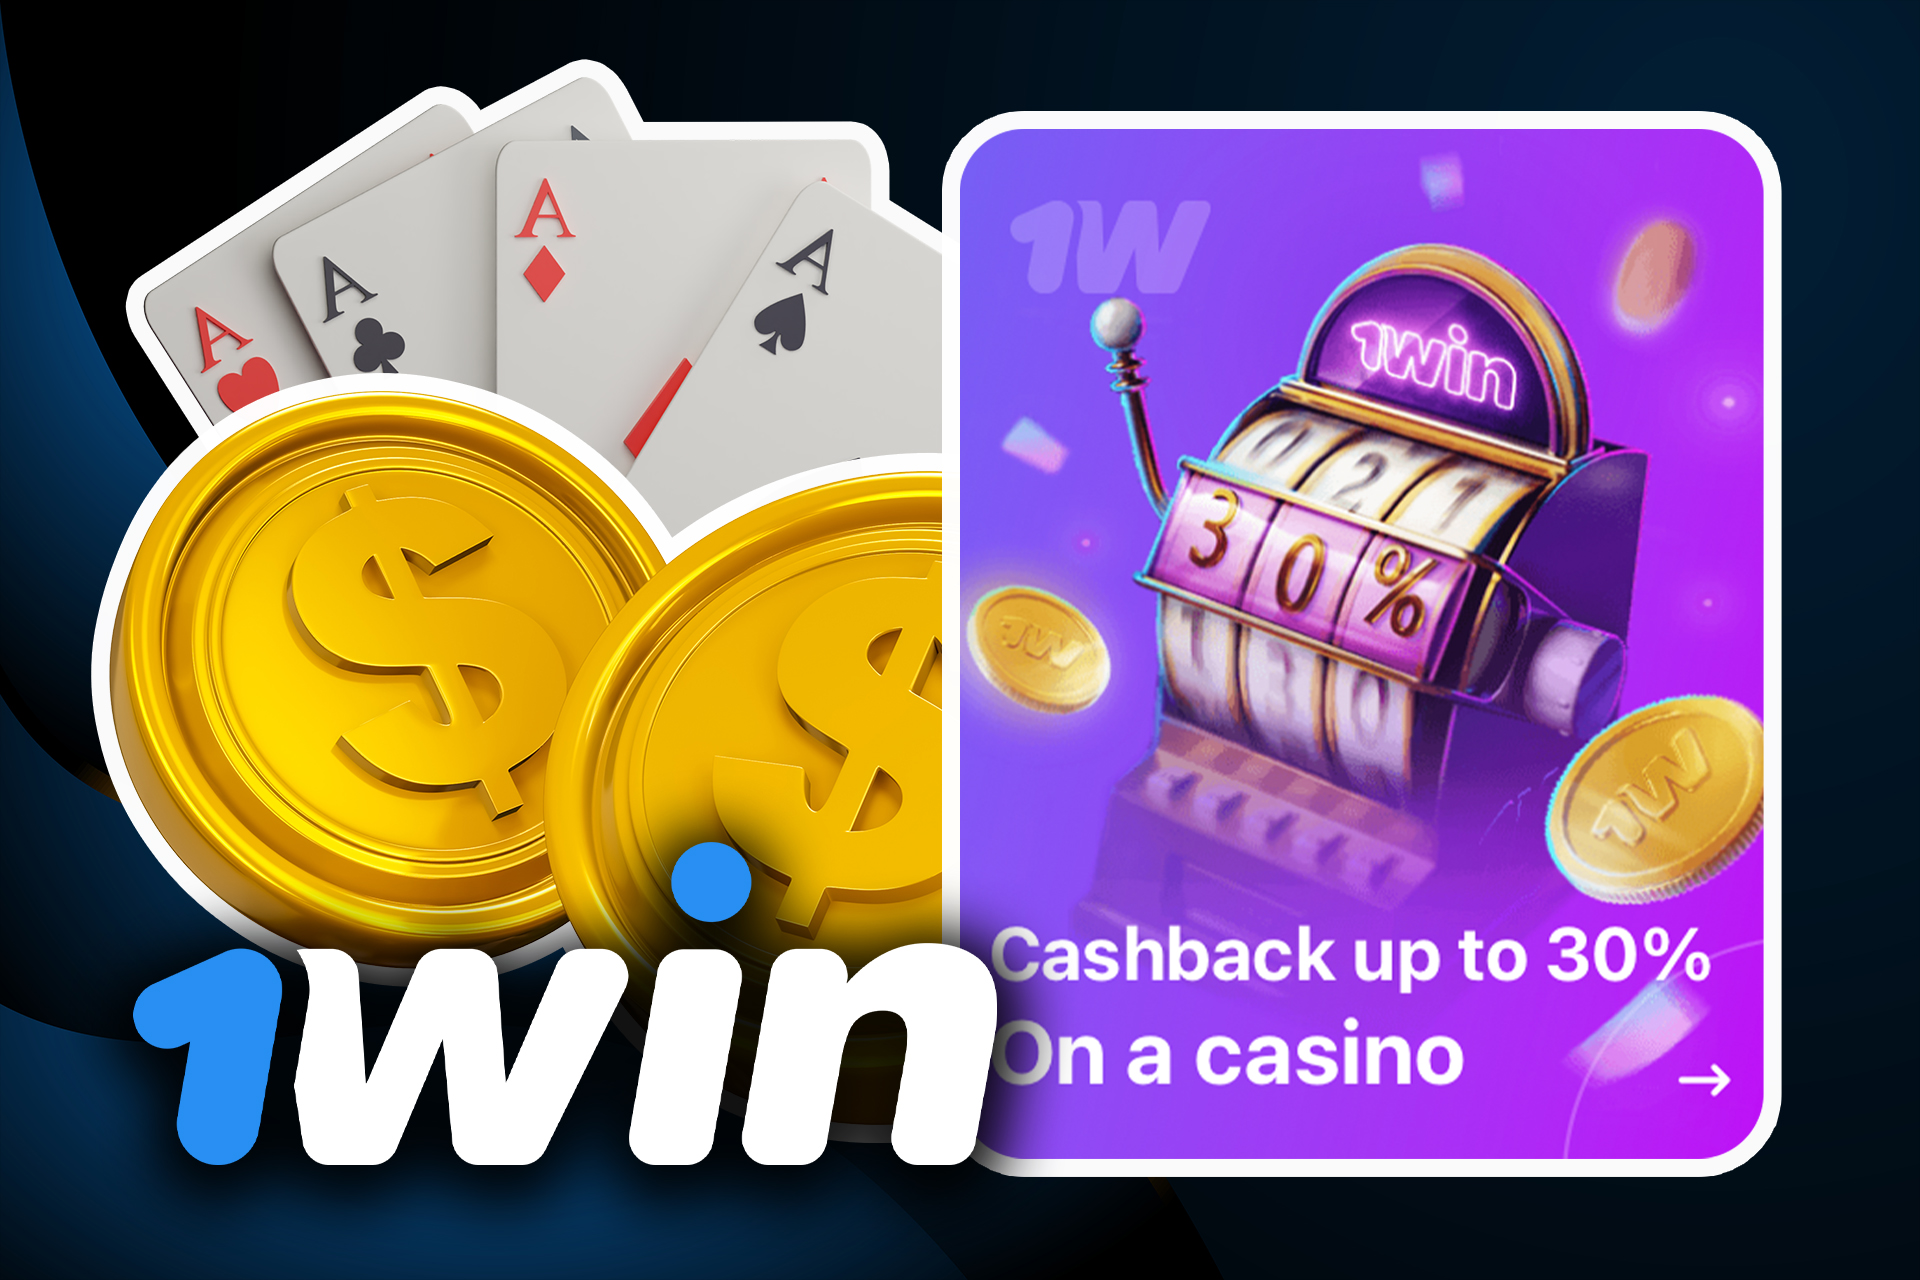 Take back 30% of your lost money in the 1win online casino.